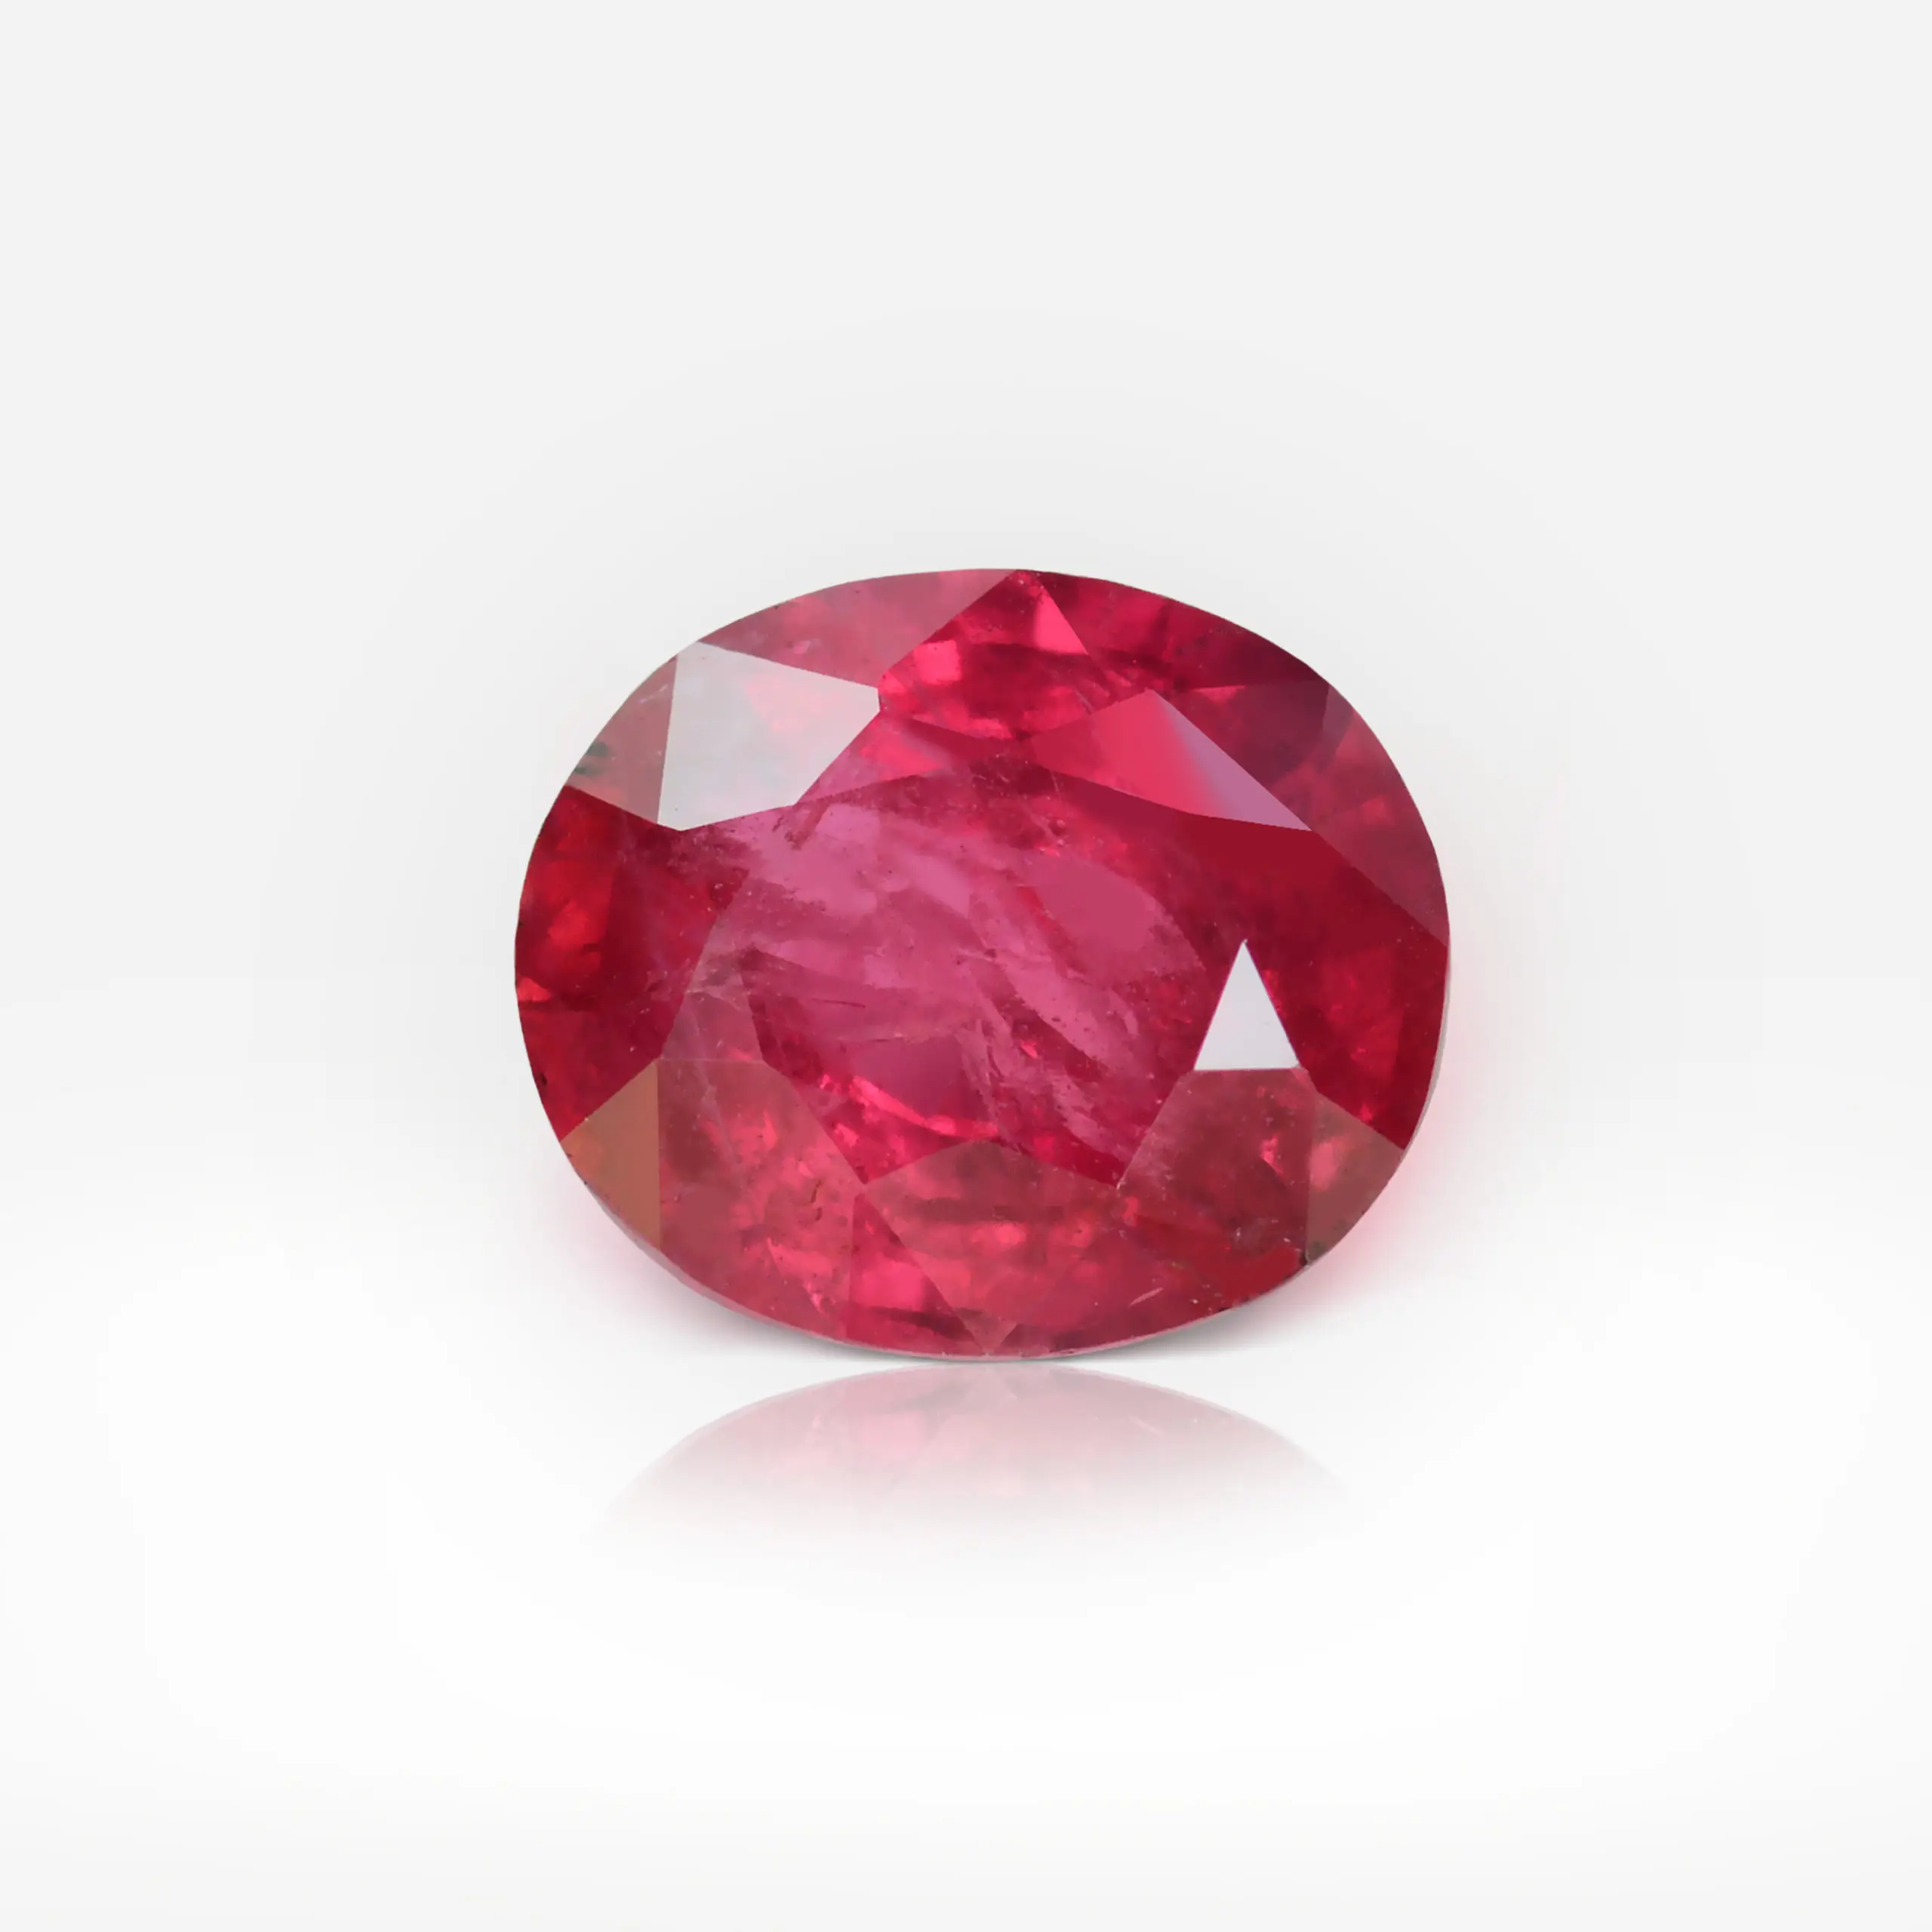 1.34 carat Oval Shape Vivid Red Tanzanian Ruby - picture 1